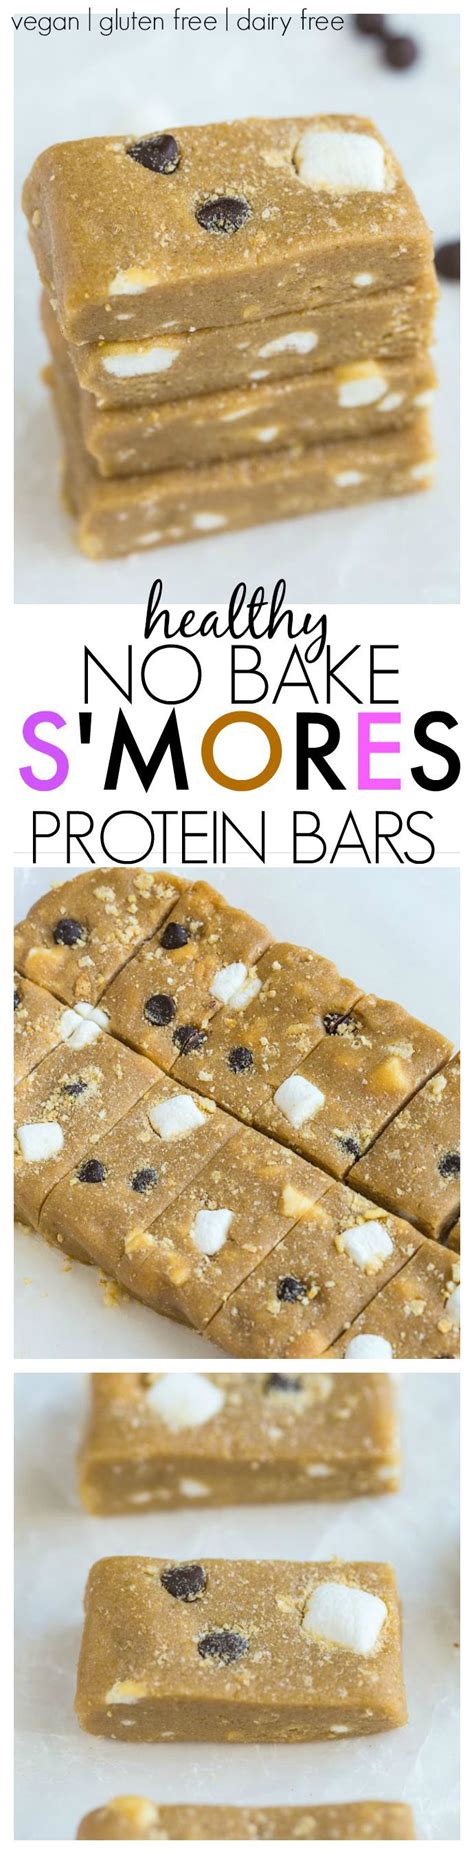 With hundreds of positive reviews from bakers around. No Bake S'mores Protein Bars which are the perfect snack ...